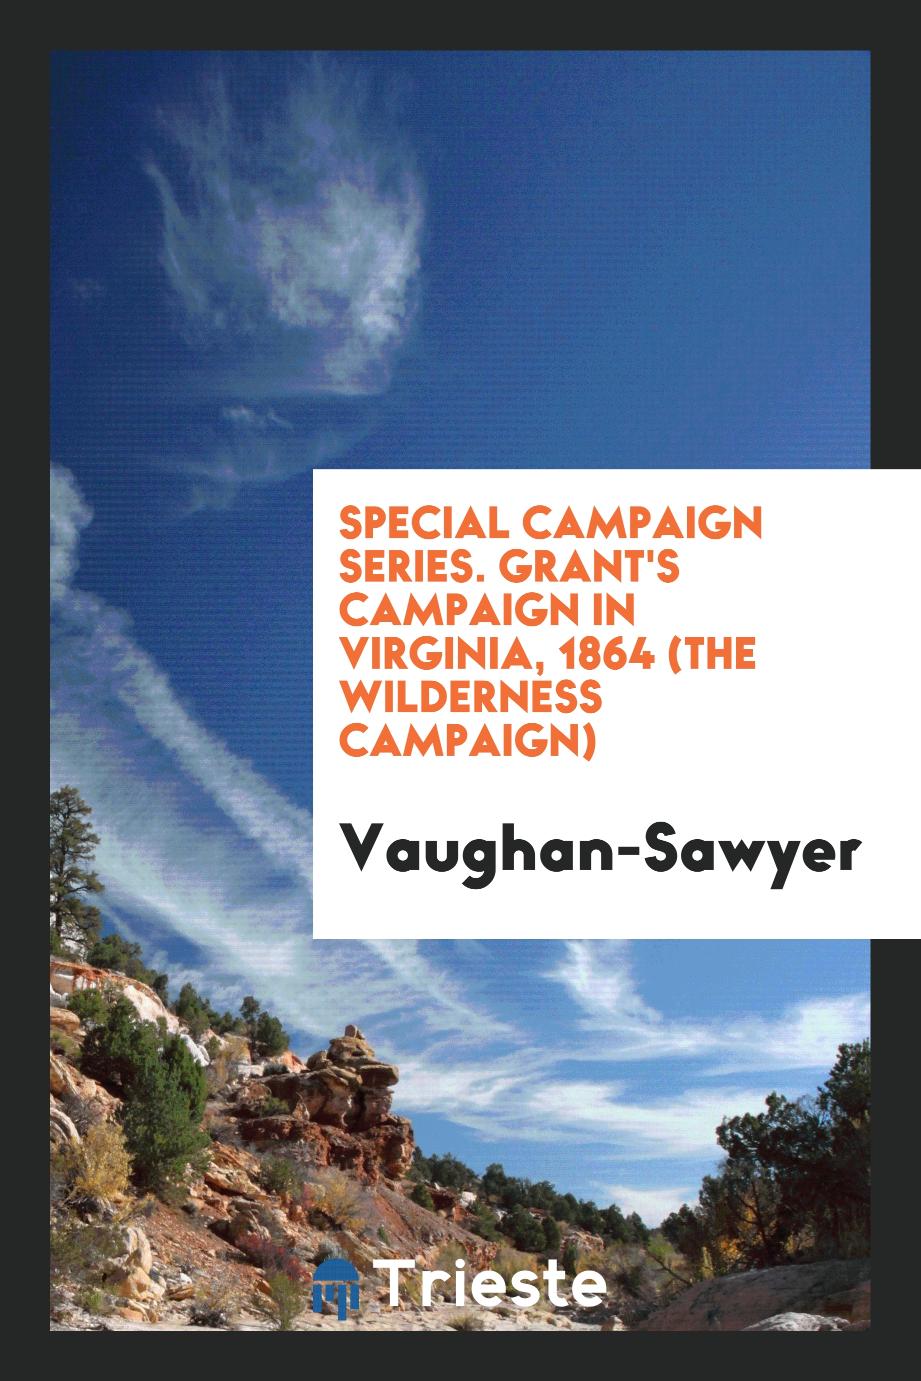 Special Campaign series. Grant's campaign in Virginia, 1864 (the Wilderness campaign)